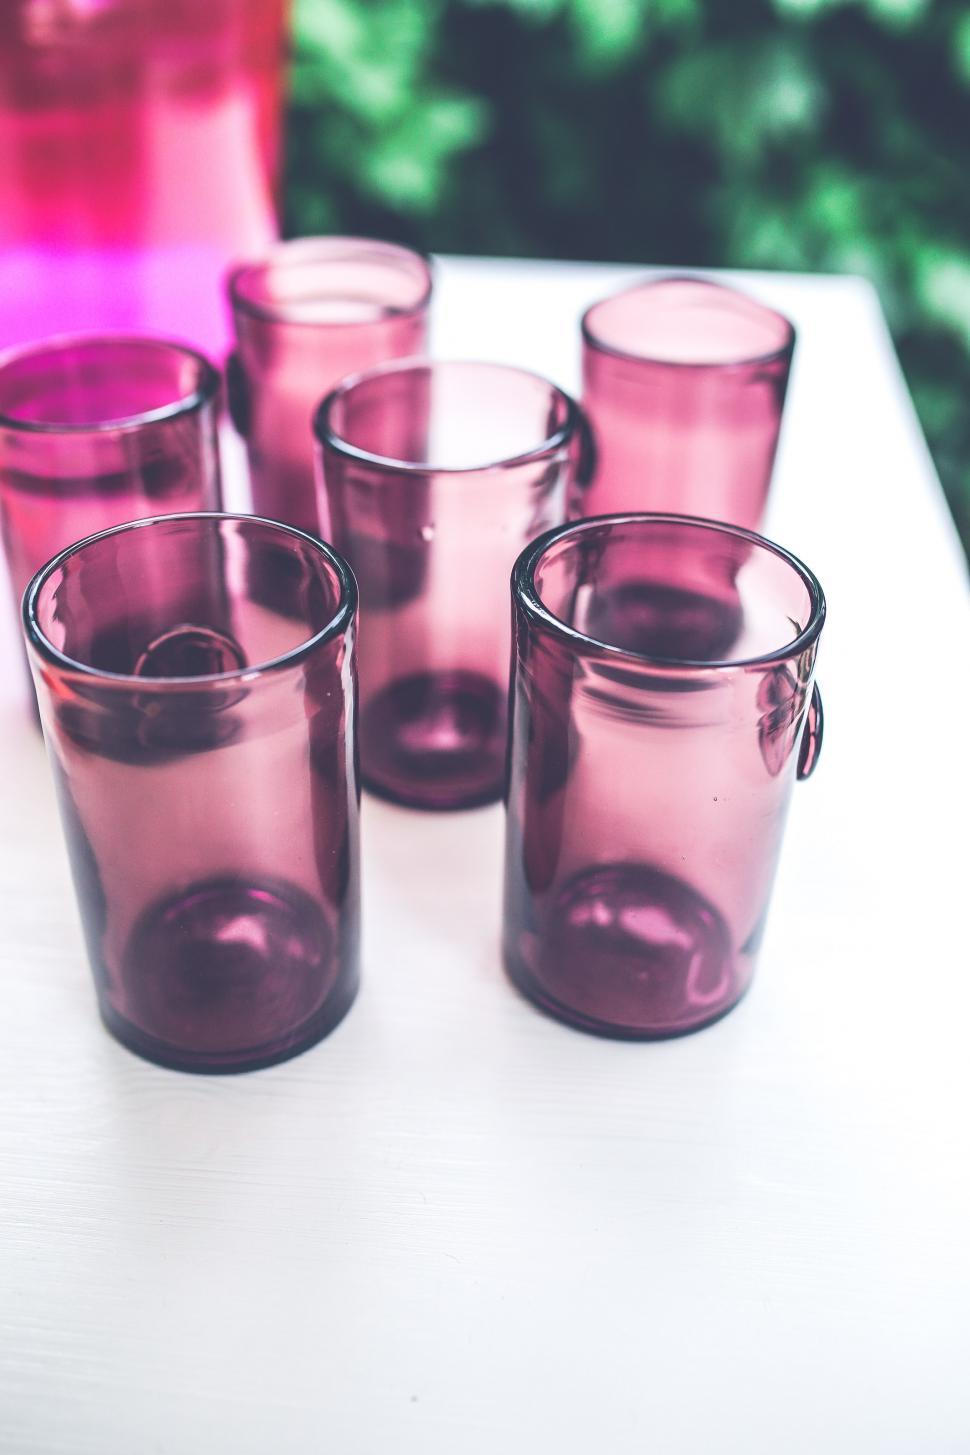 Free Image of Group of Glasses on Table 